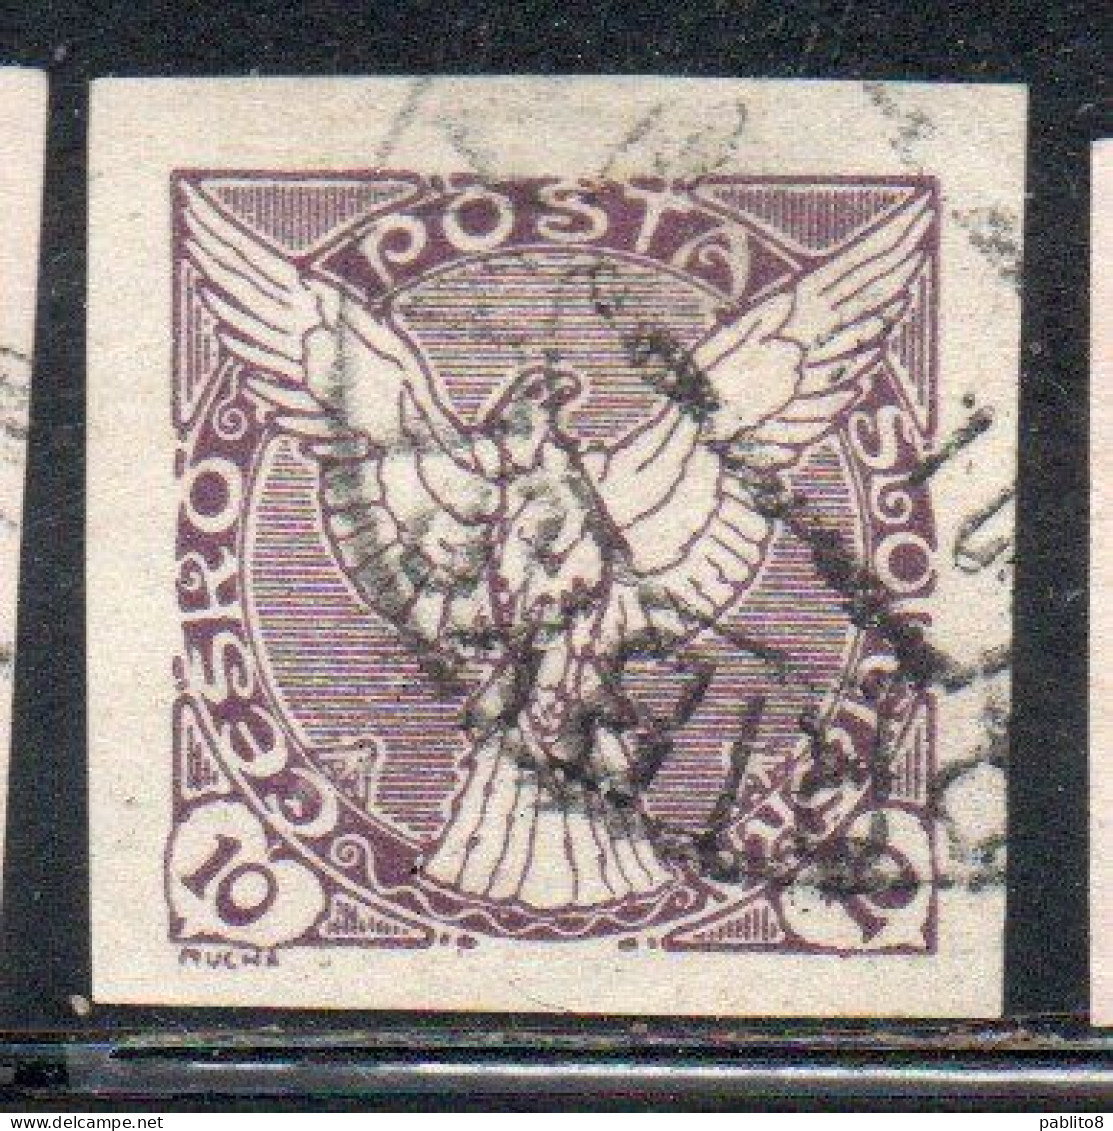 CZECHOSLOVAKIA CESKA CECOSLOVACCHIA 1918 1920 IMPERF. NEWSPAPER STAMPS WINDHOVER 10h USED USATO OBLITERE' - Timbres Pour Journaux